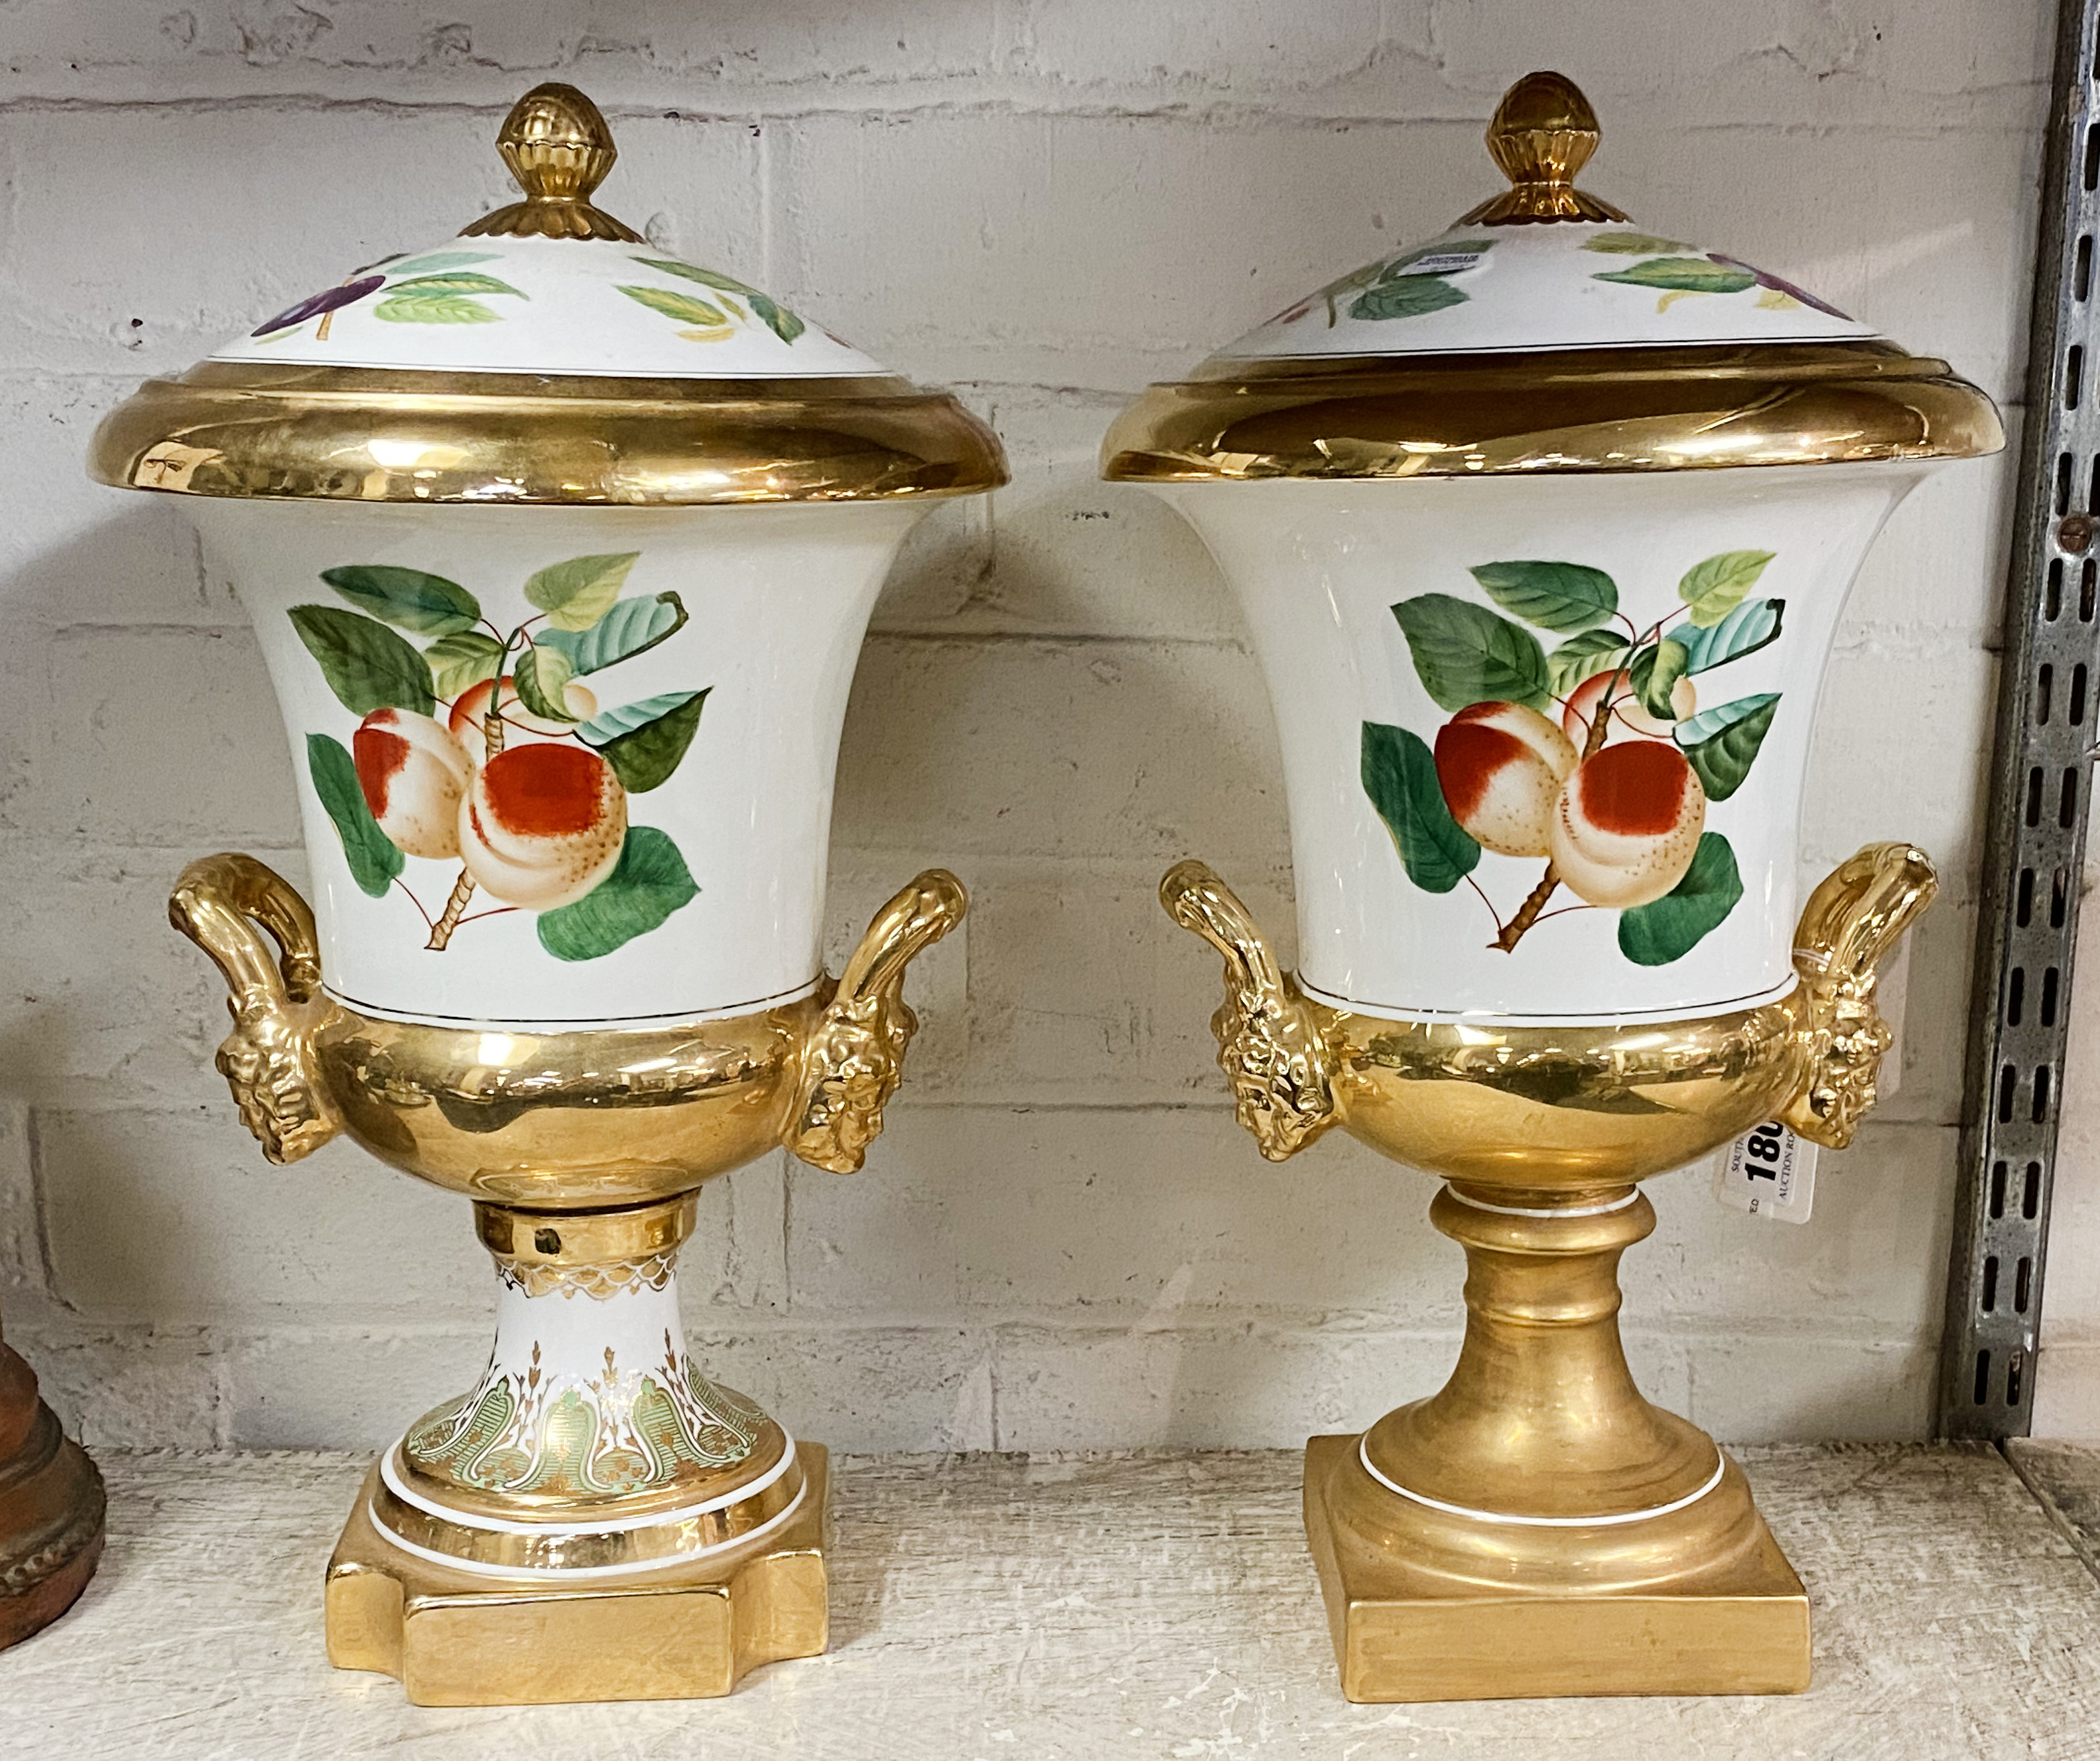 PAIR OF GILDED HAND PAINTED LIDDED URNS - 42 CMS (H)